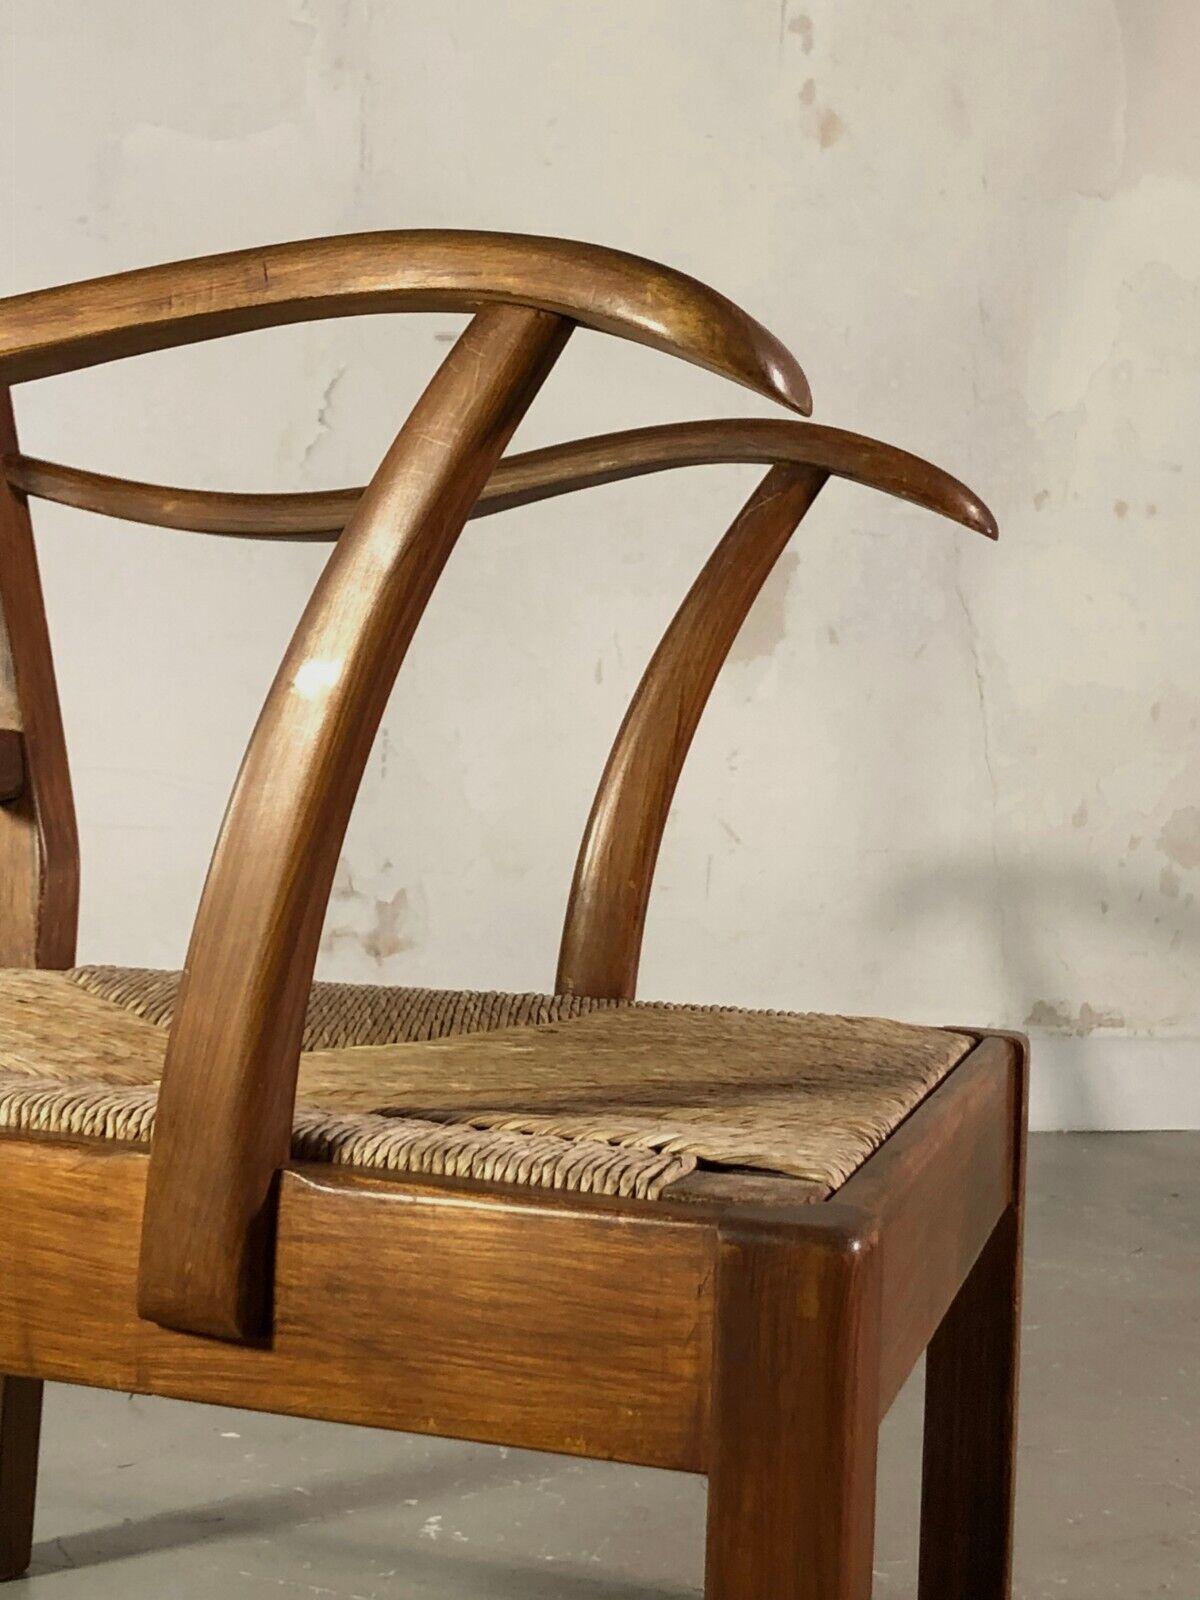 A Pair of SCANDINAVIAN Style, MID-CENTURY MODERN RUSTIC ARMCHAIRS, France 1950 For Sale 2